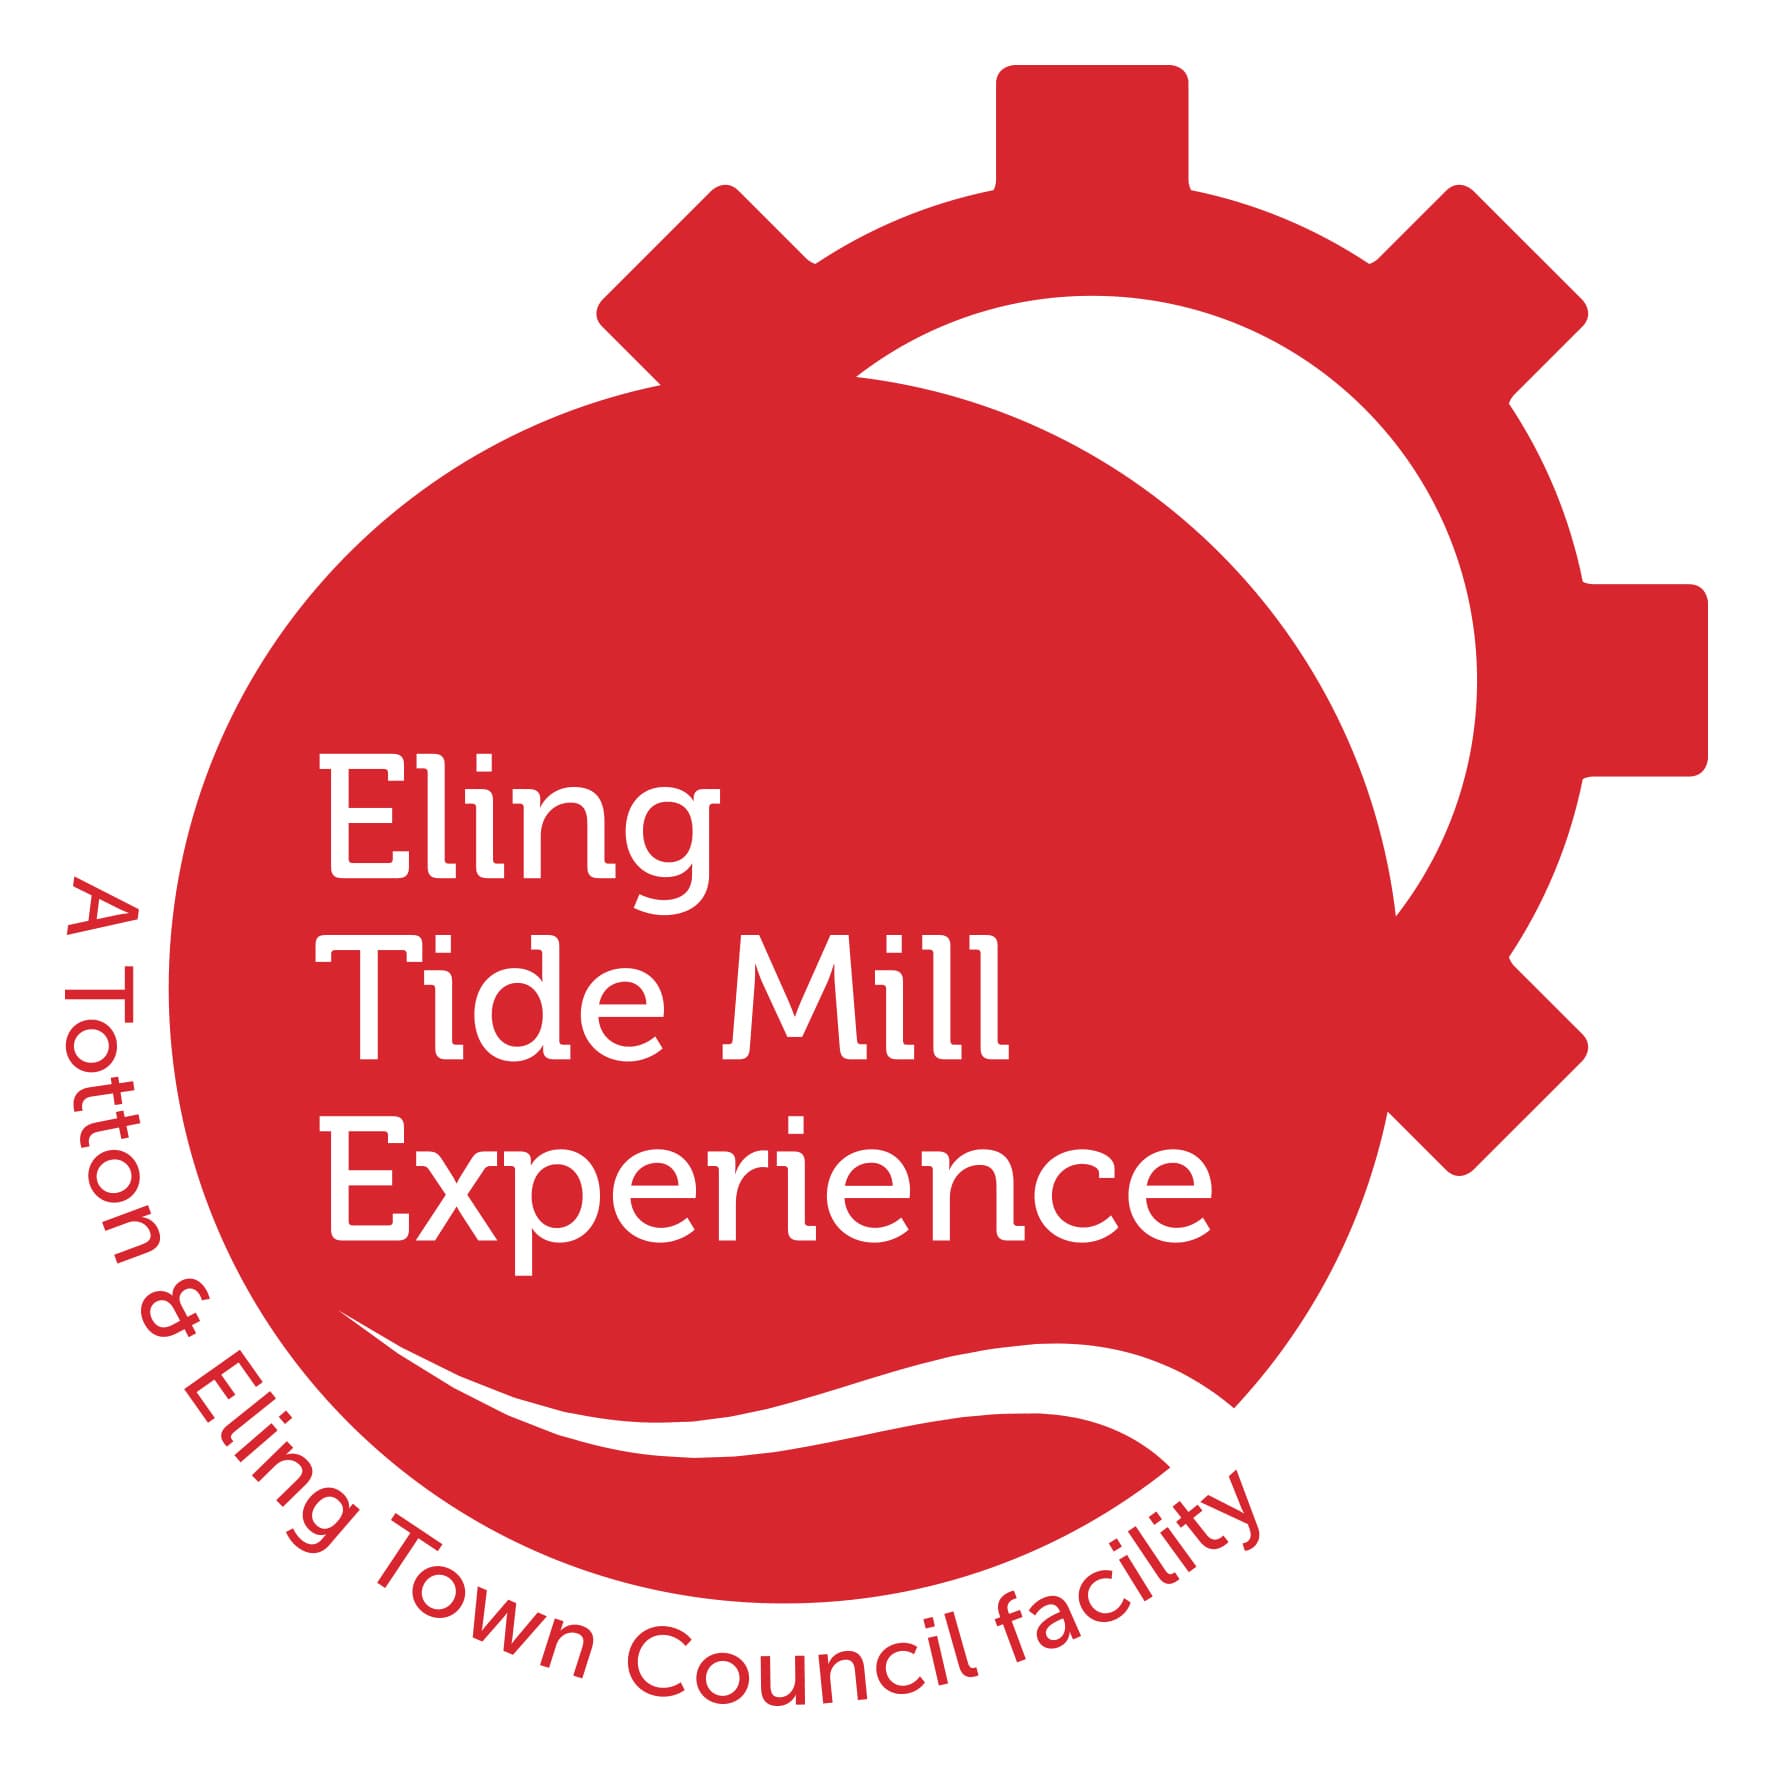 Eling Tide Mill Experience